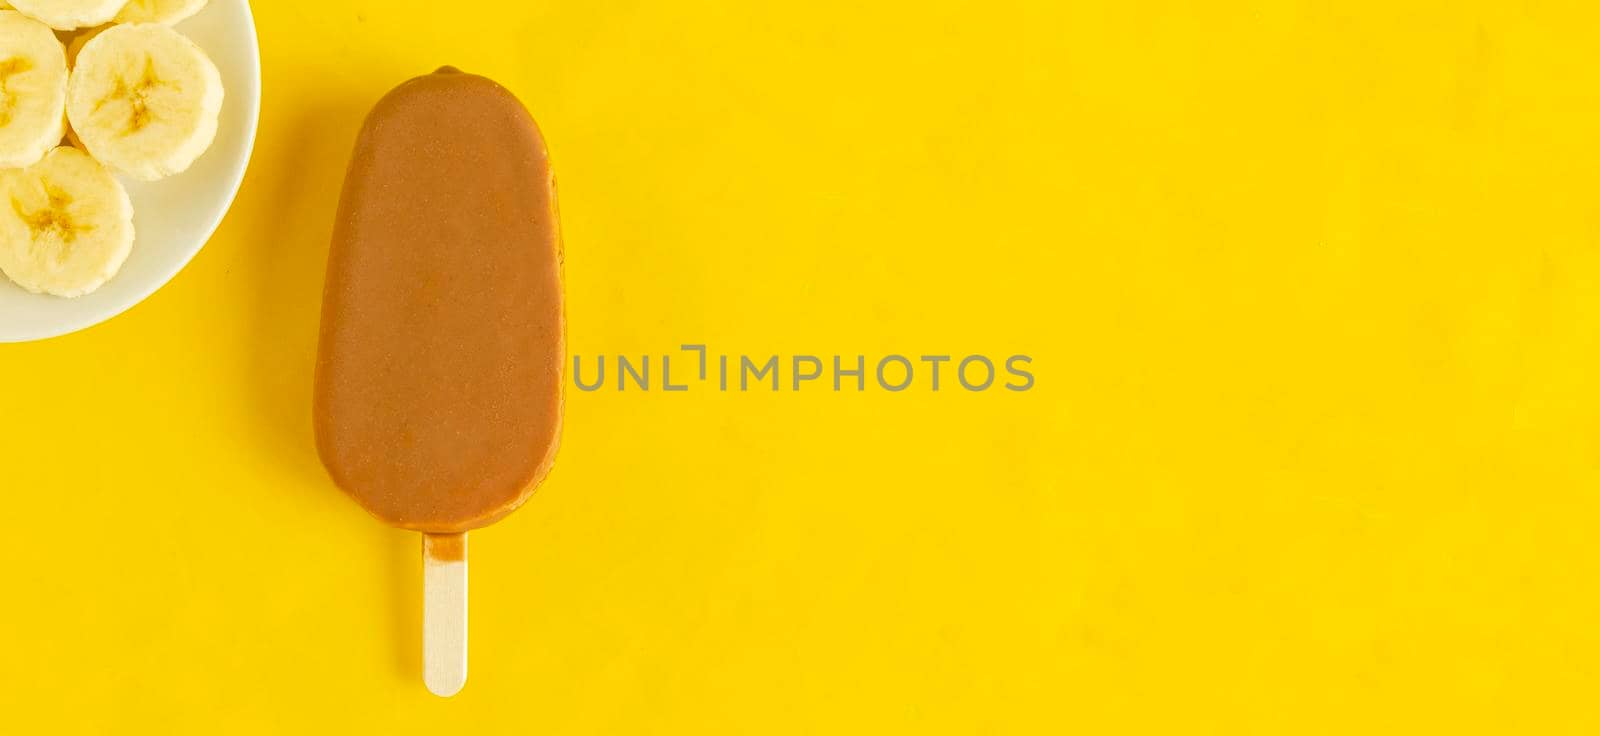 Banana vanilla popsicle in chocolated glaze on bright yellow background.Slices of banana on the plate,copyspace.Summer cool dessert.